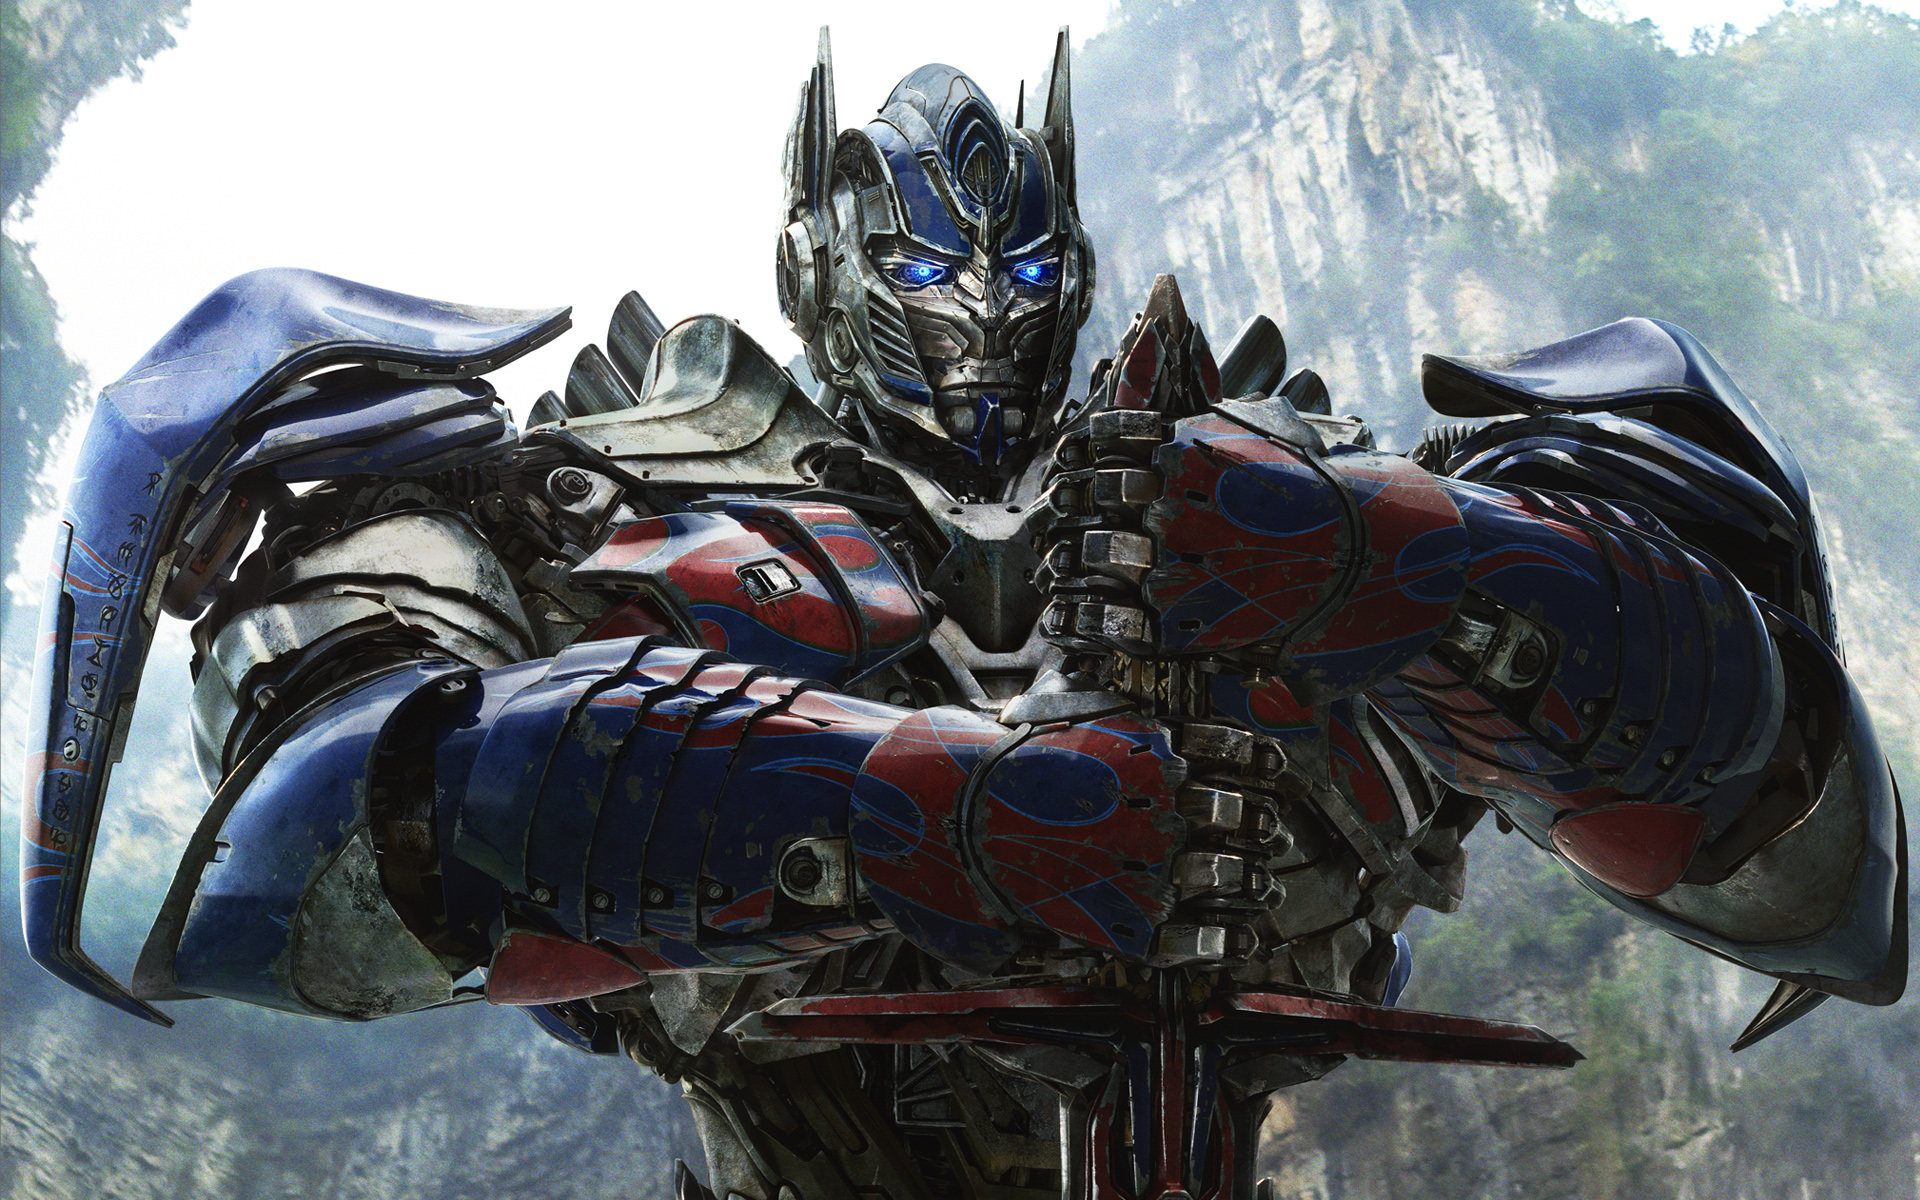 Exclusive Optimus Prime in Transformers 4 HD Wallpapers 1920x1200